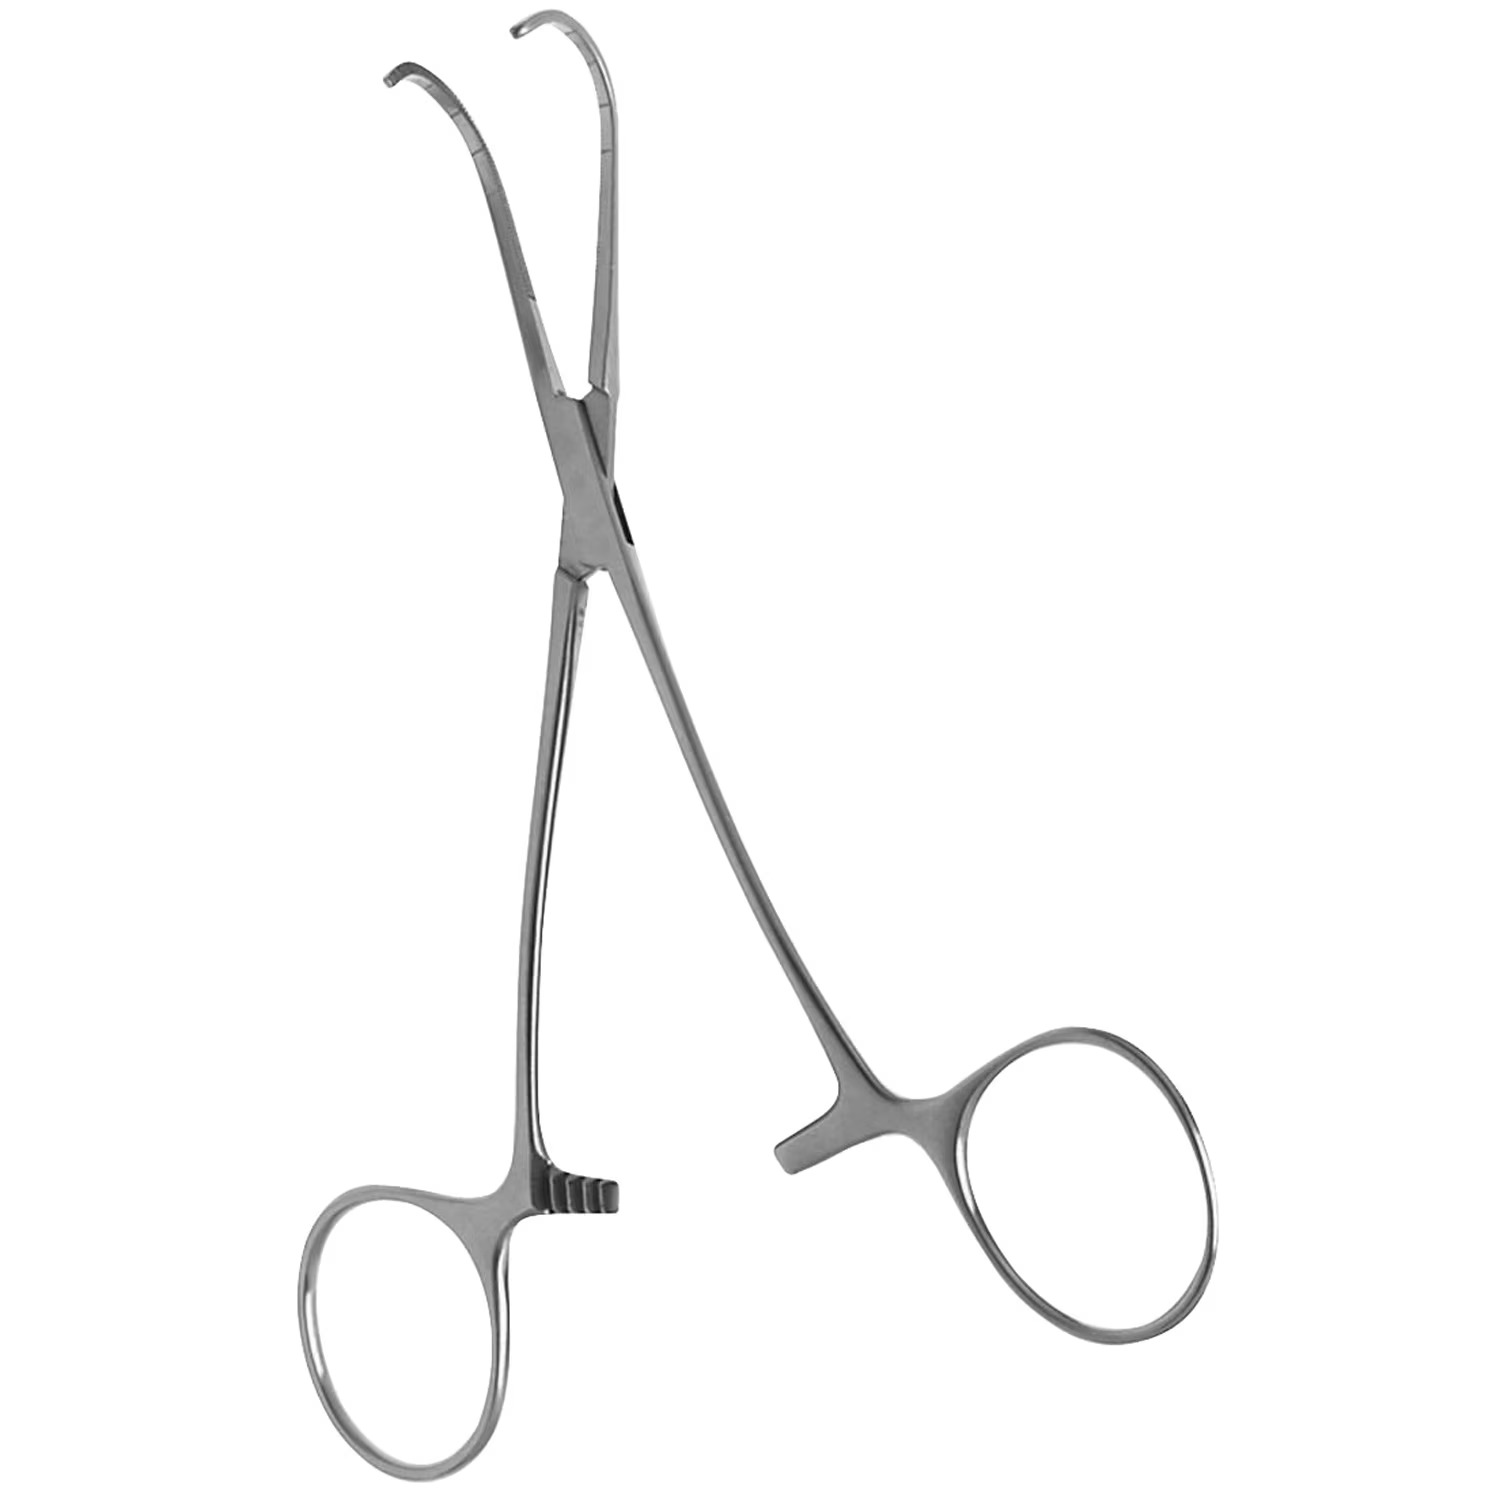 Castaneda Anastomosis Forceps Clamps German Stainless Steel Health and Medical Equipments Surgical Instruments